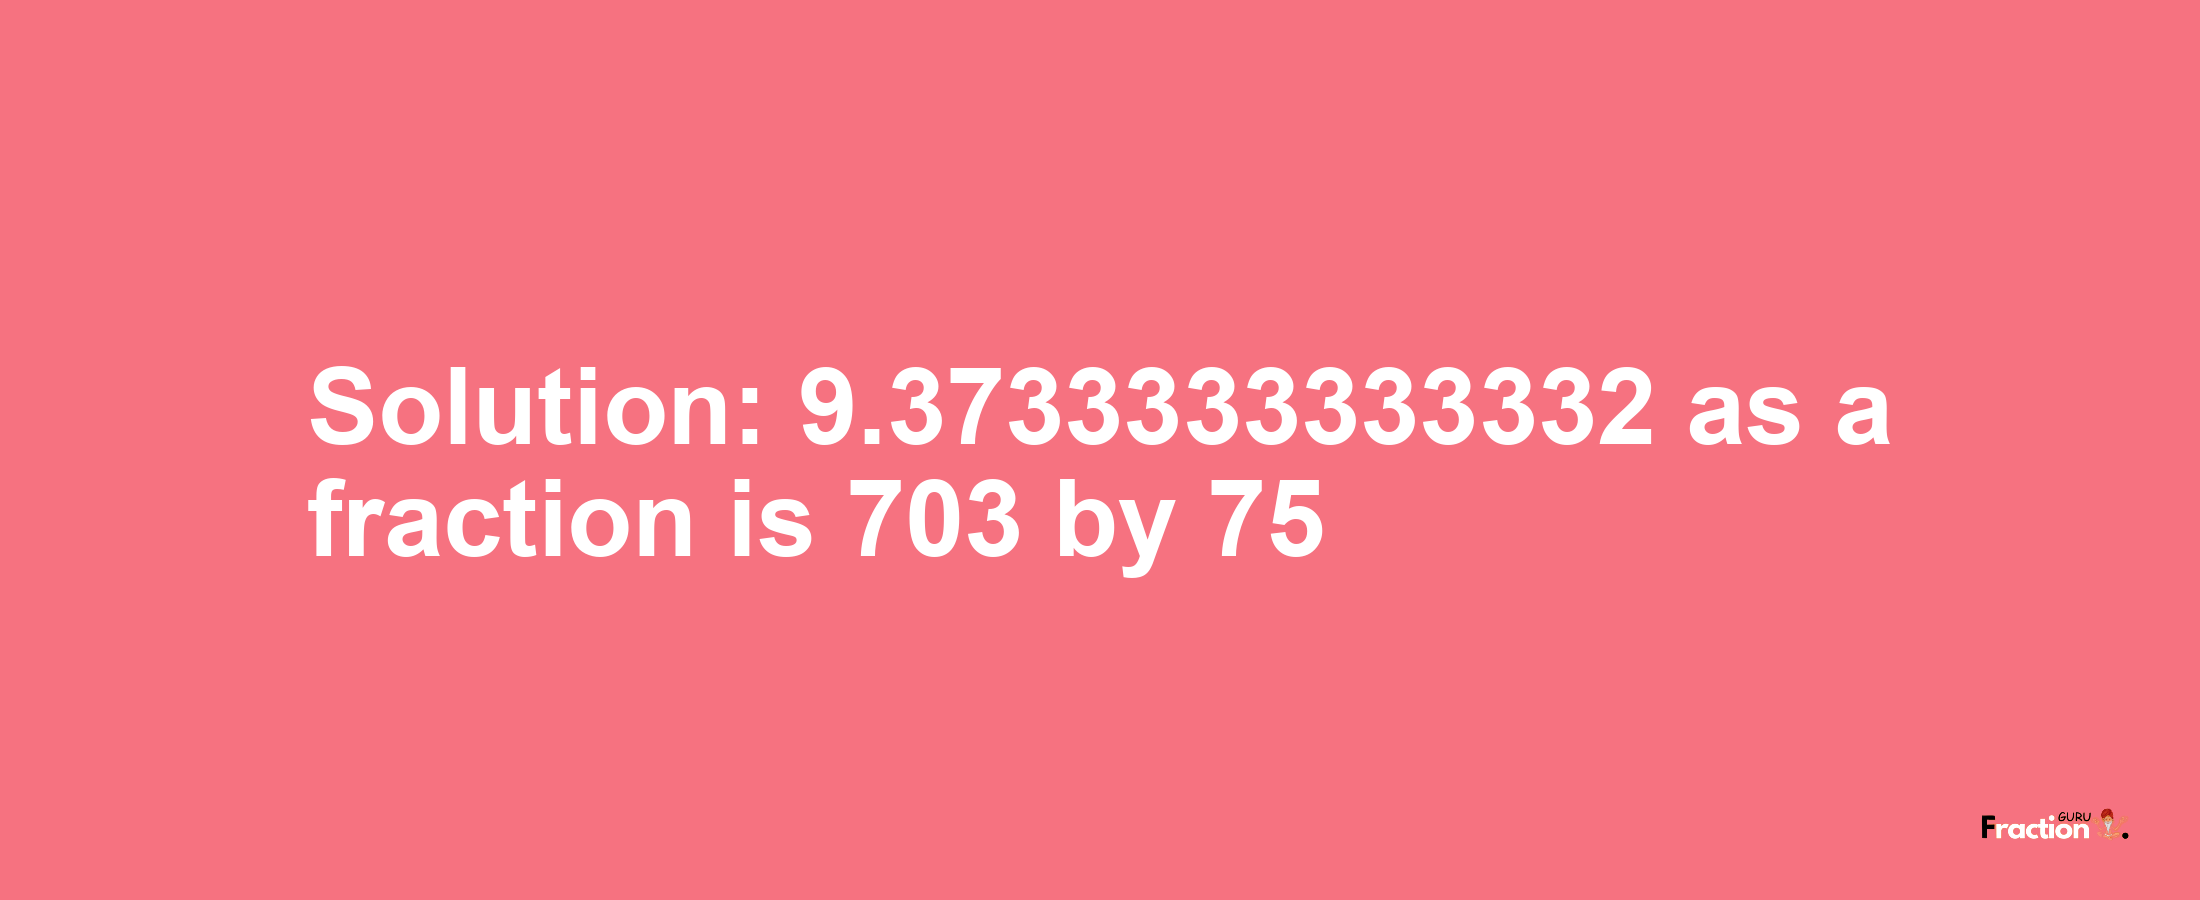 Solution:9.3733333333332 as a fraction is 703/75